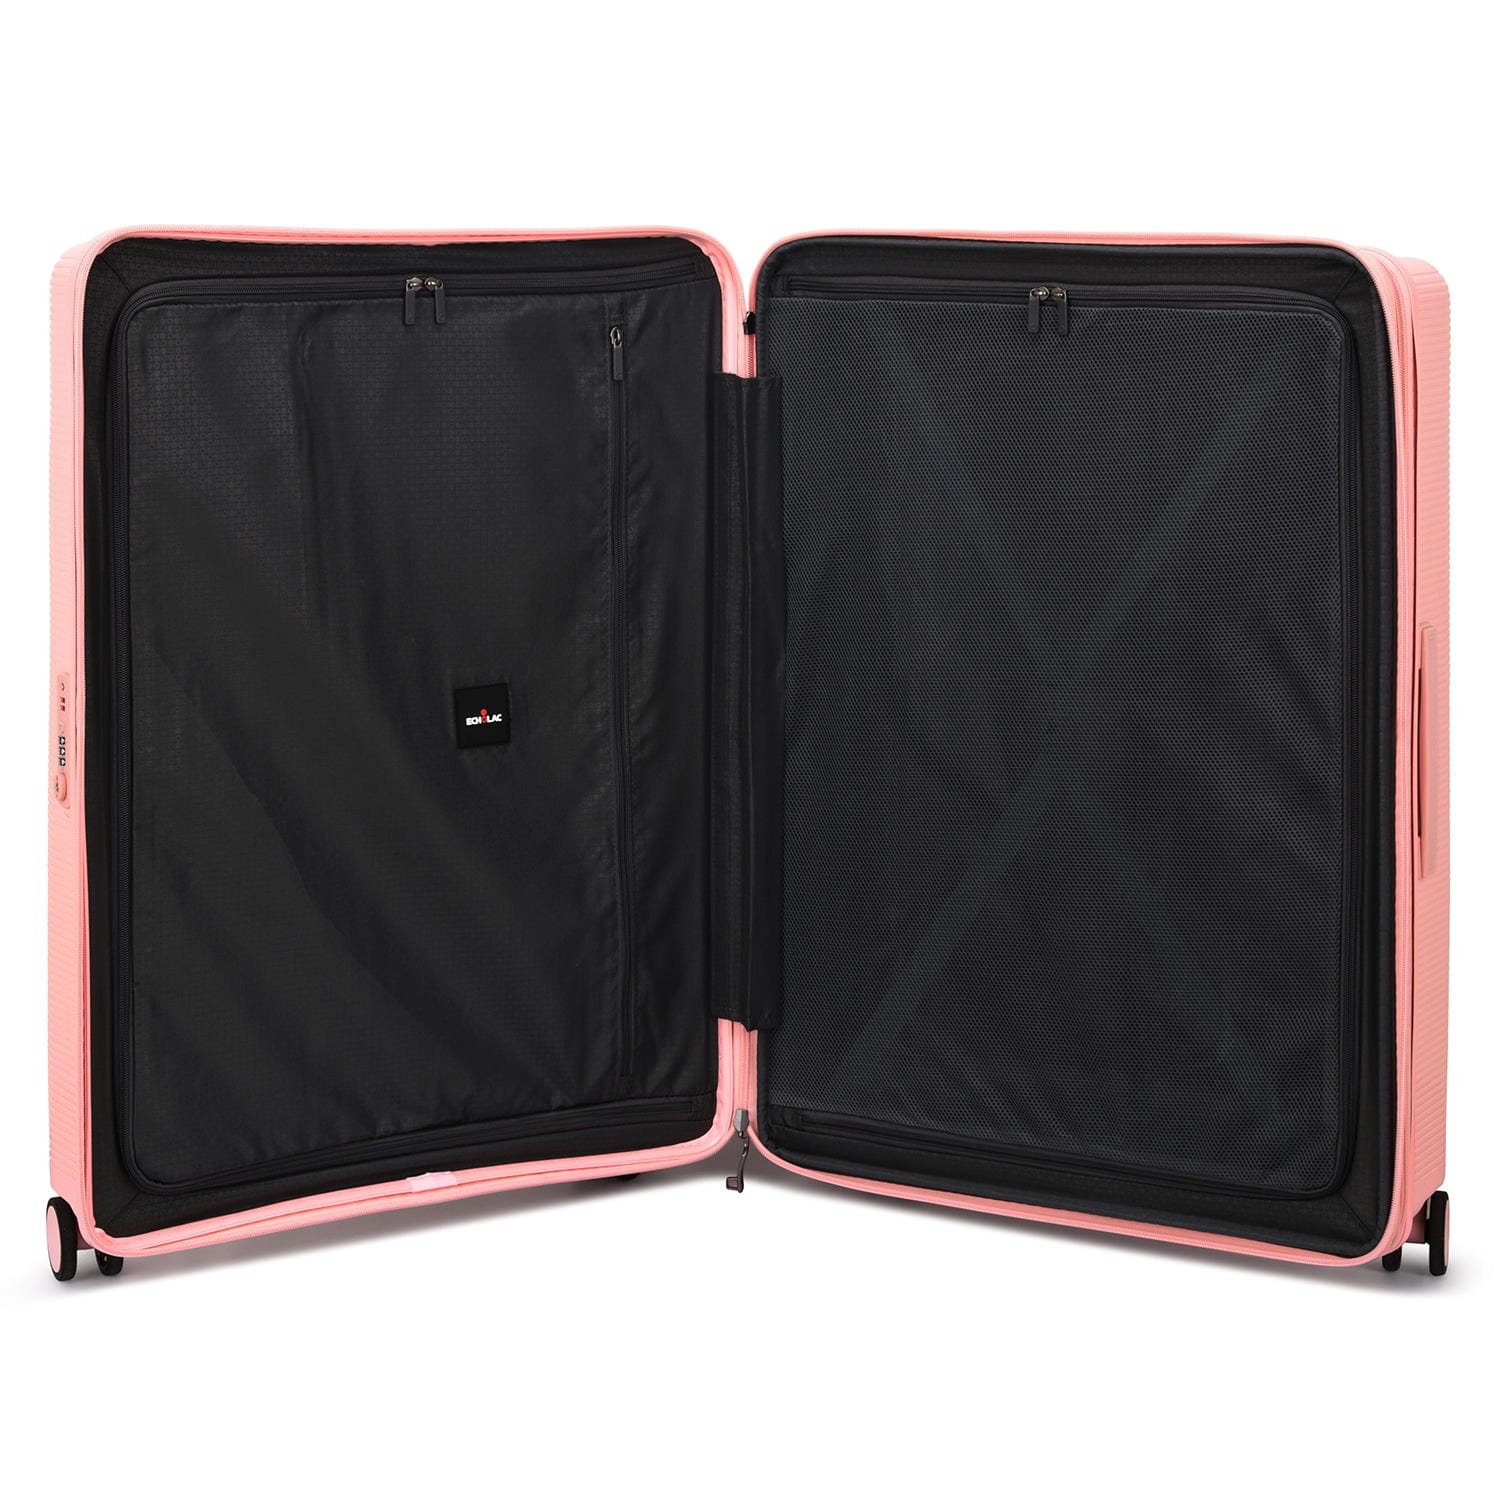 Echolac Forza 55+65+75cm Hardcase 4 Double Wheel Expandable Cabin & Check-In Luggage Trolley Set Passion Pink